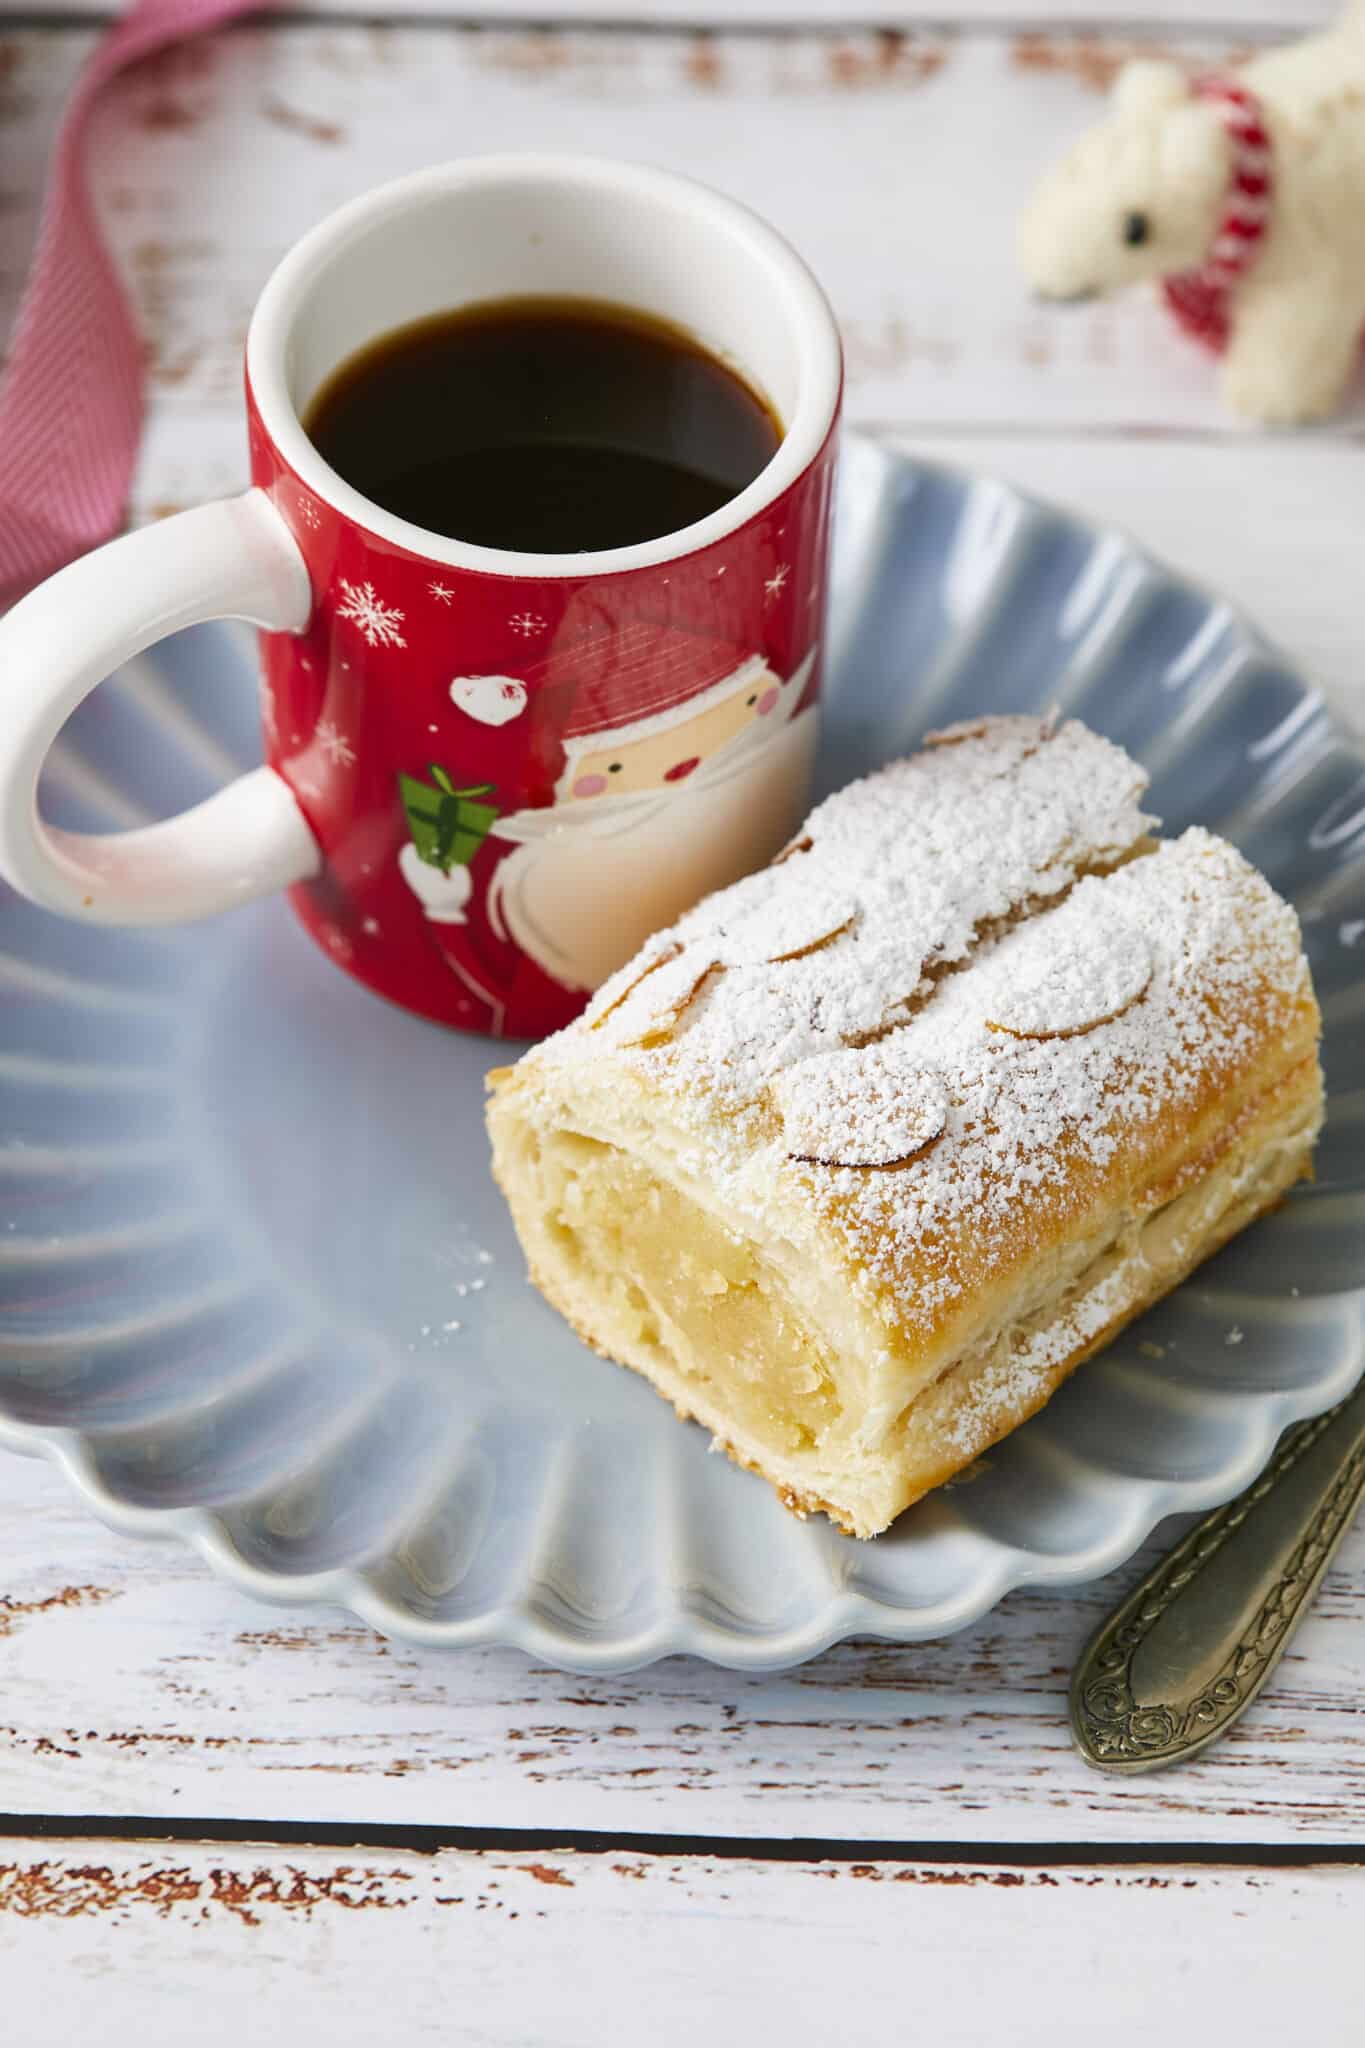 The delicate Dutch Banketstaaf is made from almond-paste-filled puff pastry logs topped with powdered sugar and sliced almonds and served sliced. It's served on a blue plate with a cup of coffee. 